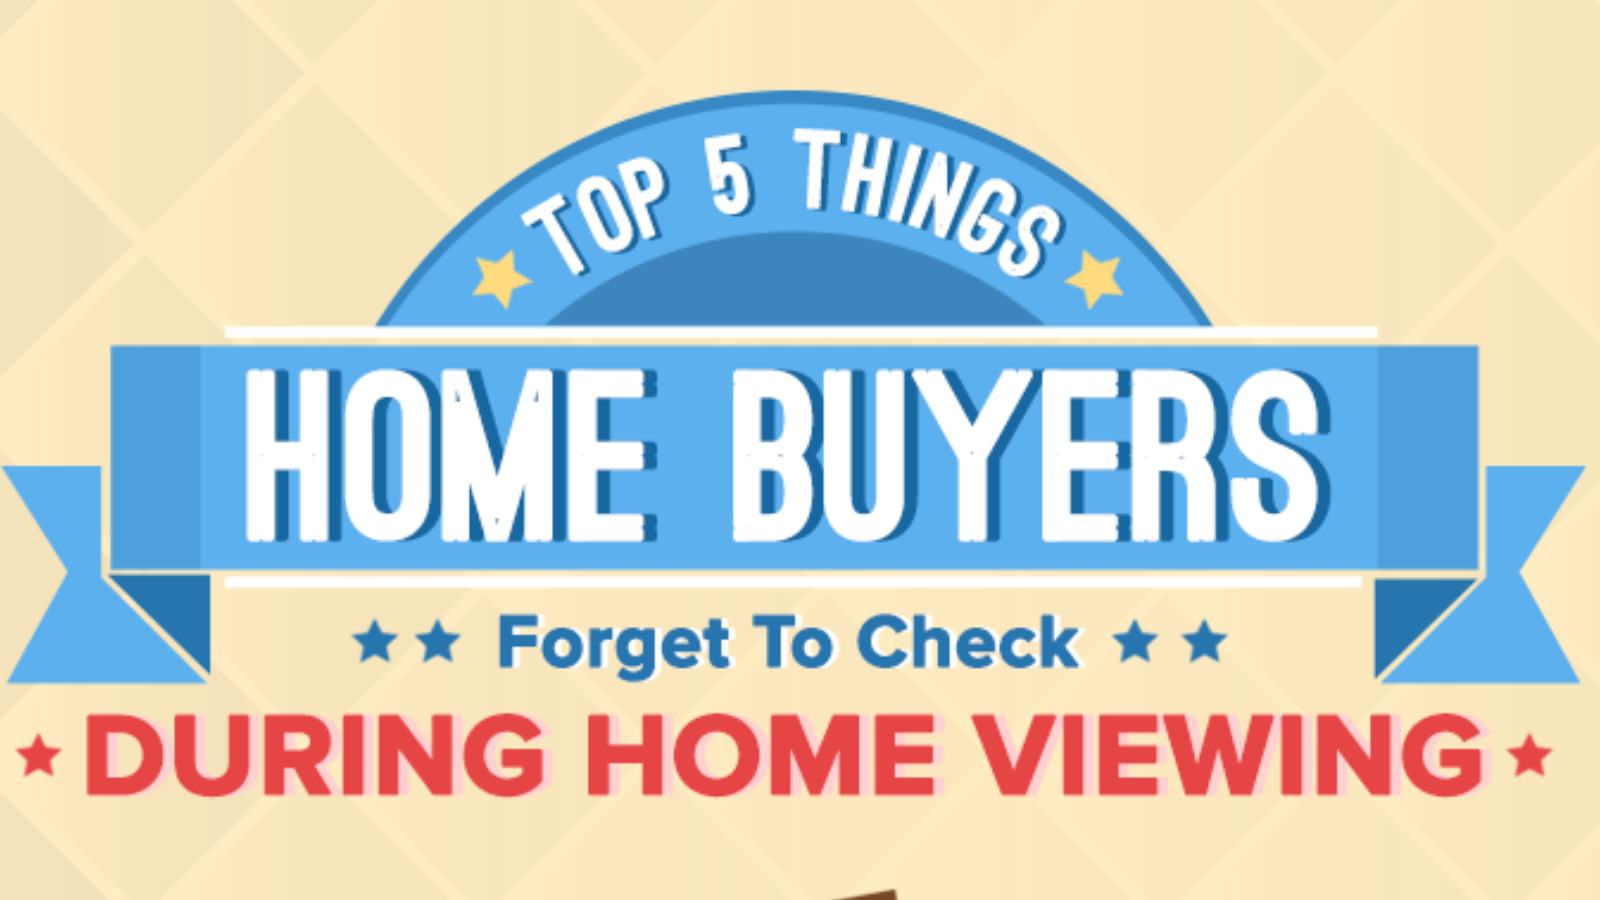 Top 5 Things Home Buyers Forget To Check During Home Viewing